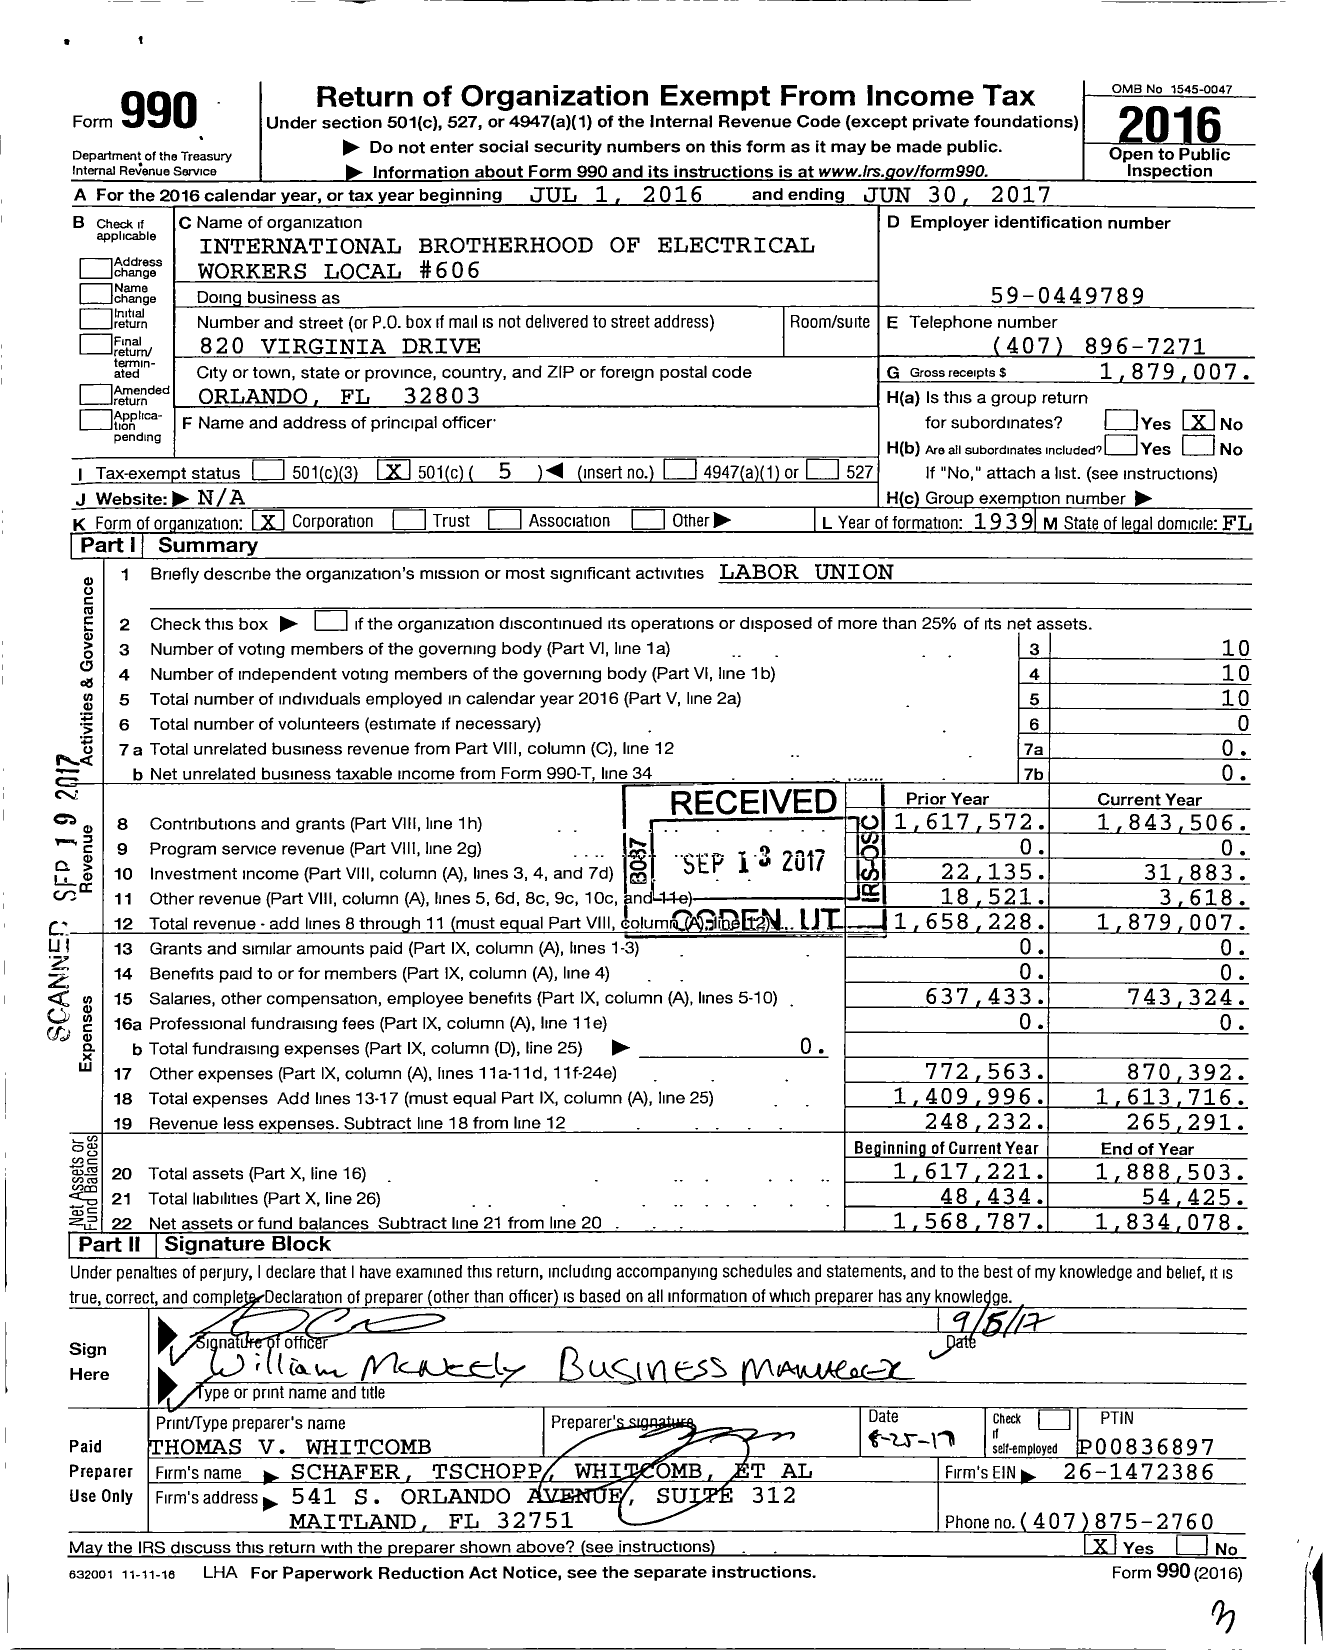 Image of first page of 2016 Form 990O for International Brotherhood of Electrical Workers Local 606